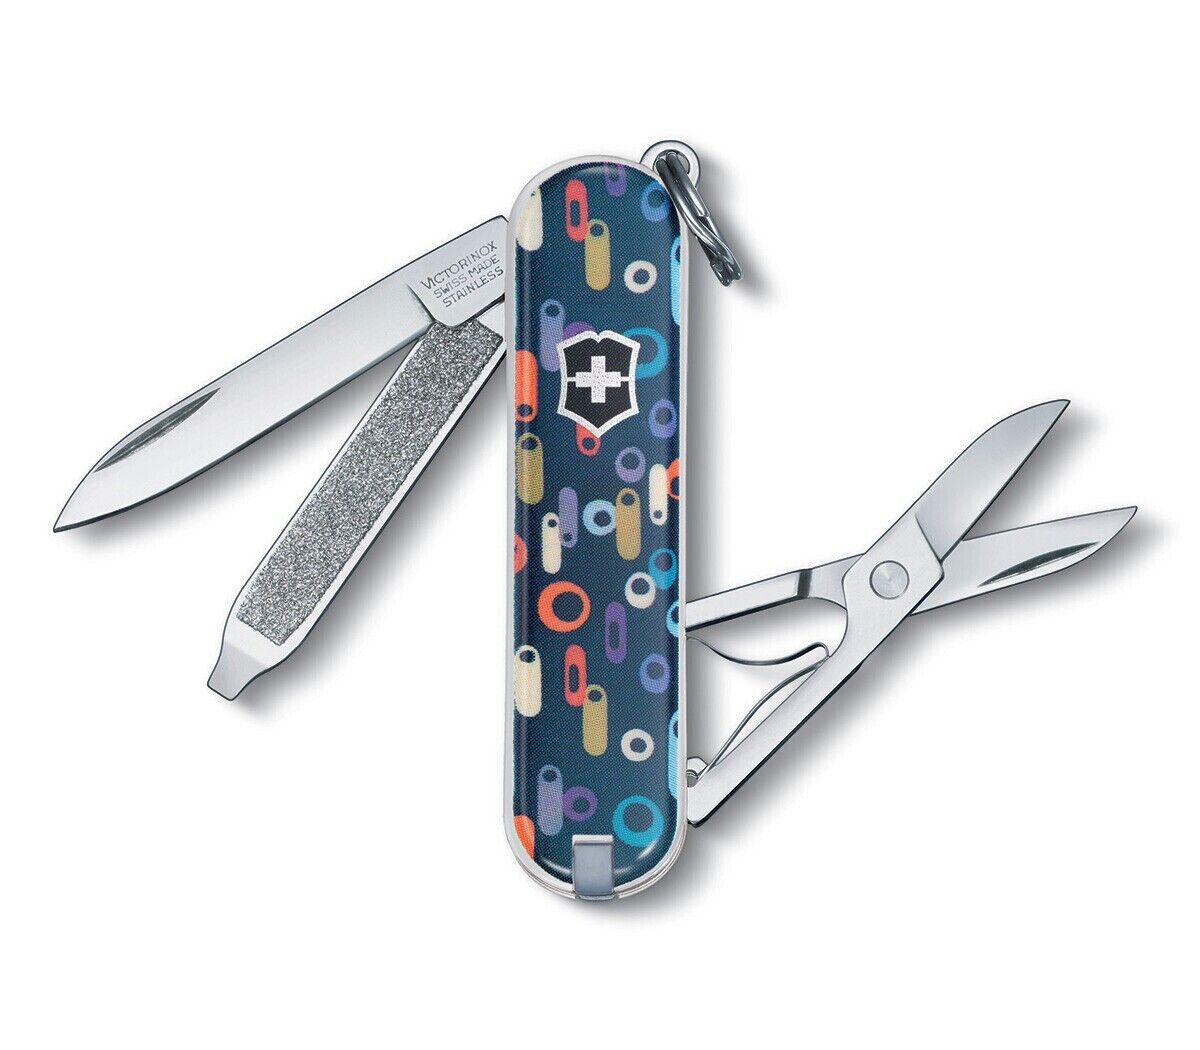 RARE Victorinox 2011 ROARING SIXTIES Limited Edition Classic SD Swiss Army Knife